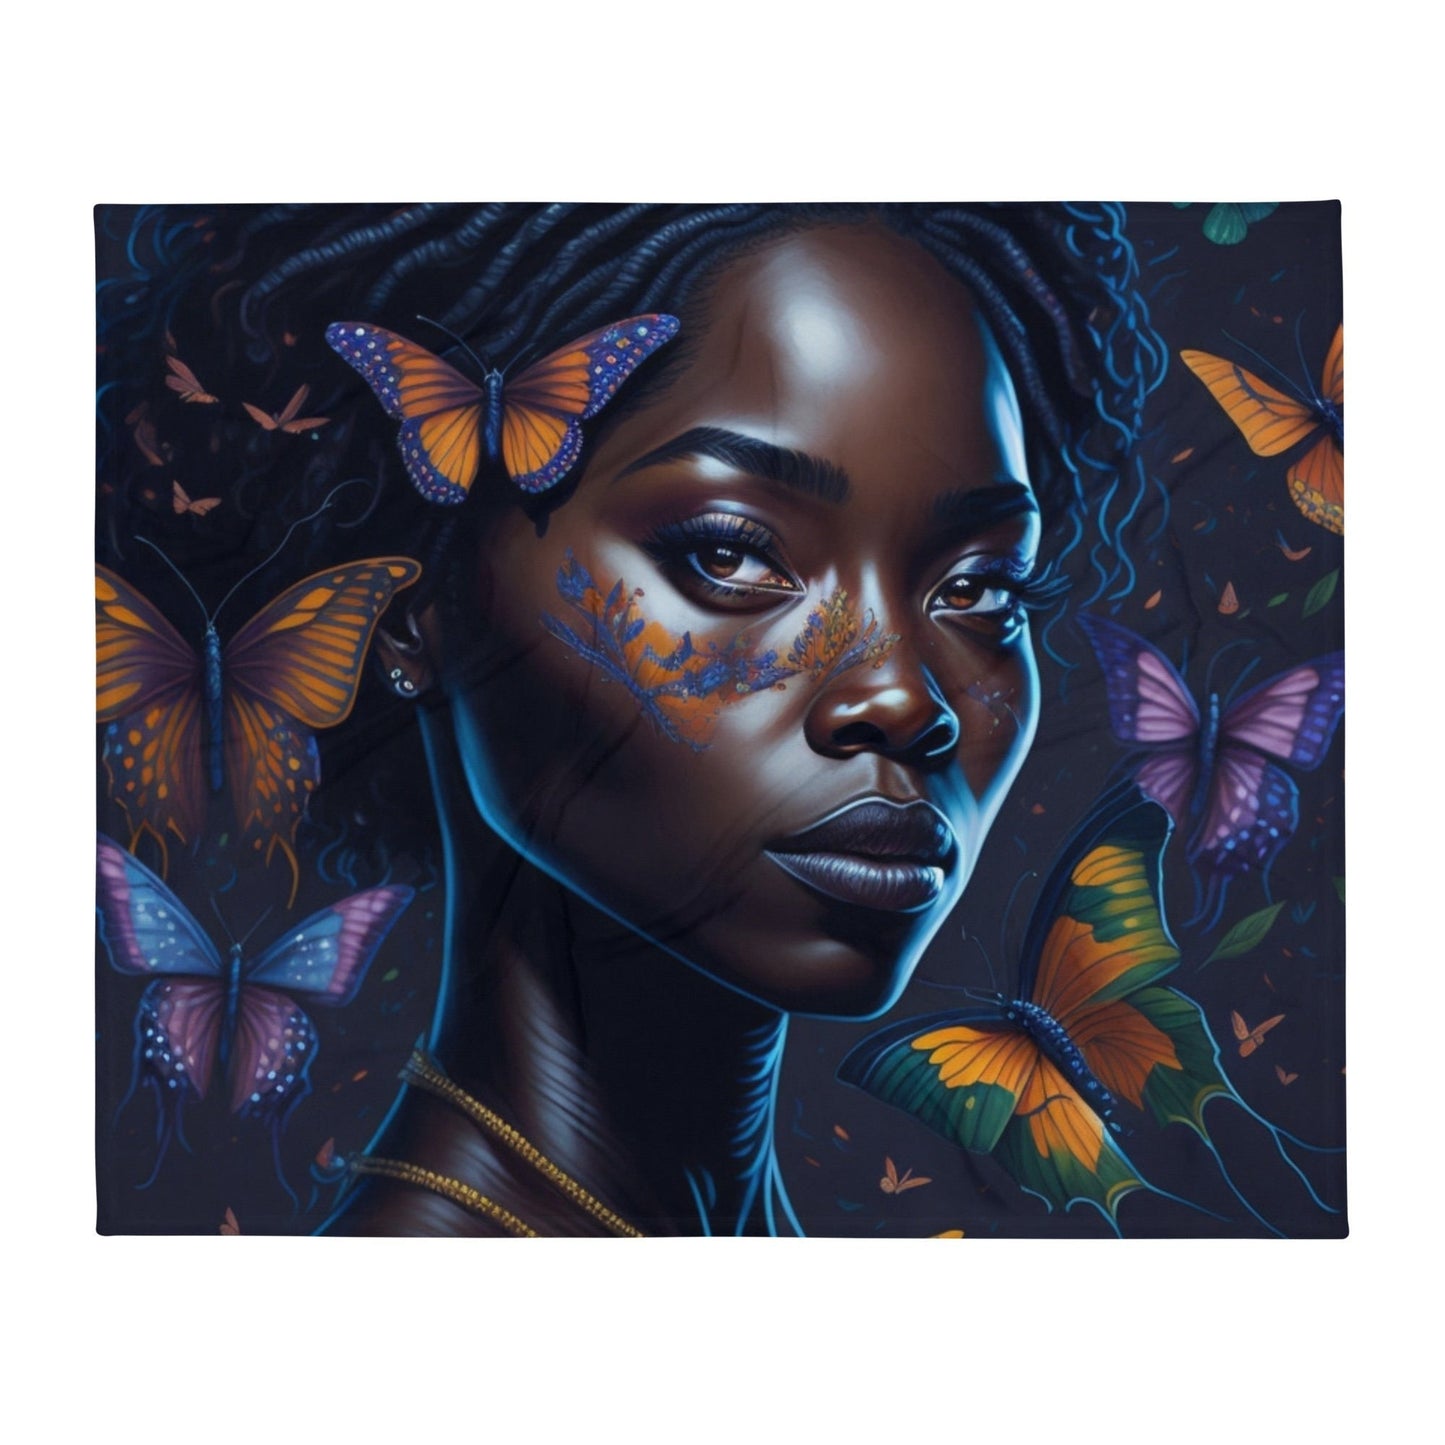 Graceful Wings: Portrait of an African American Woman with Fluttering Butterflies Throw Blanket-THROW BLANKET-50″×60″-Wings of Resilience-mysticalcherry